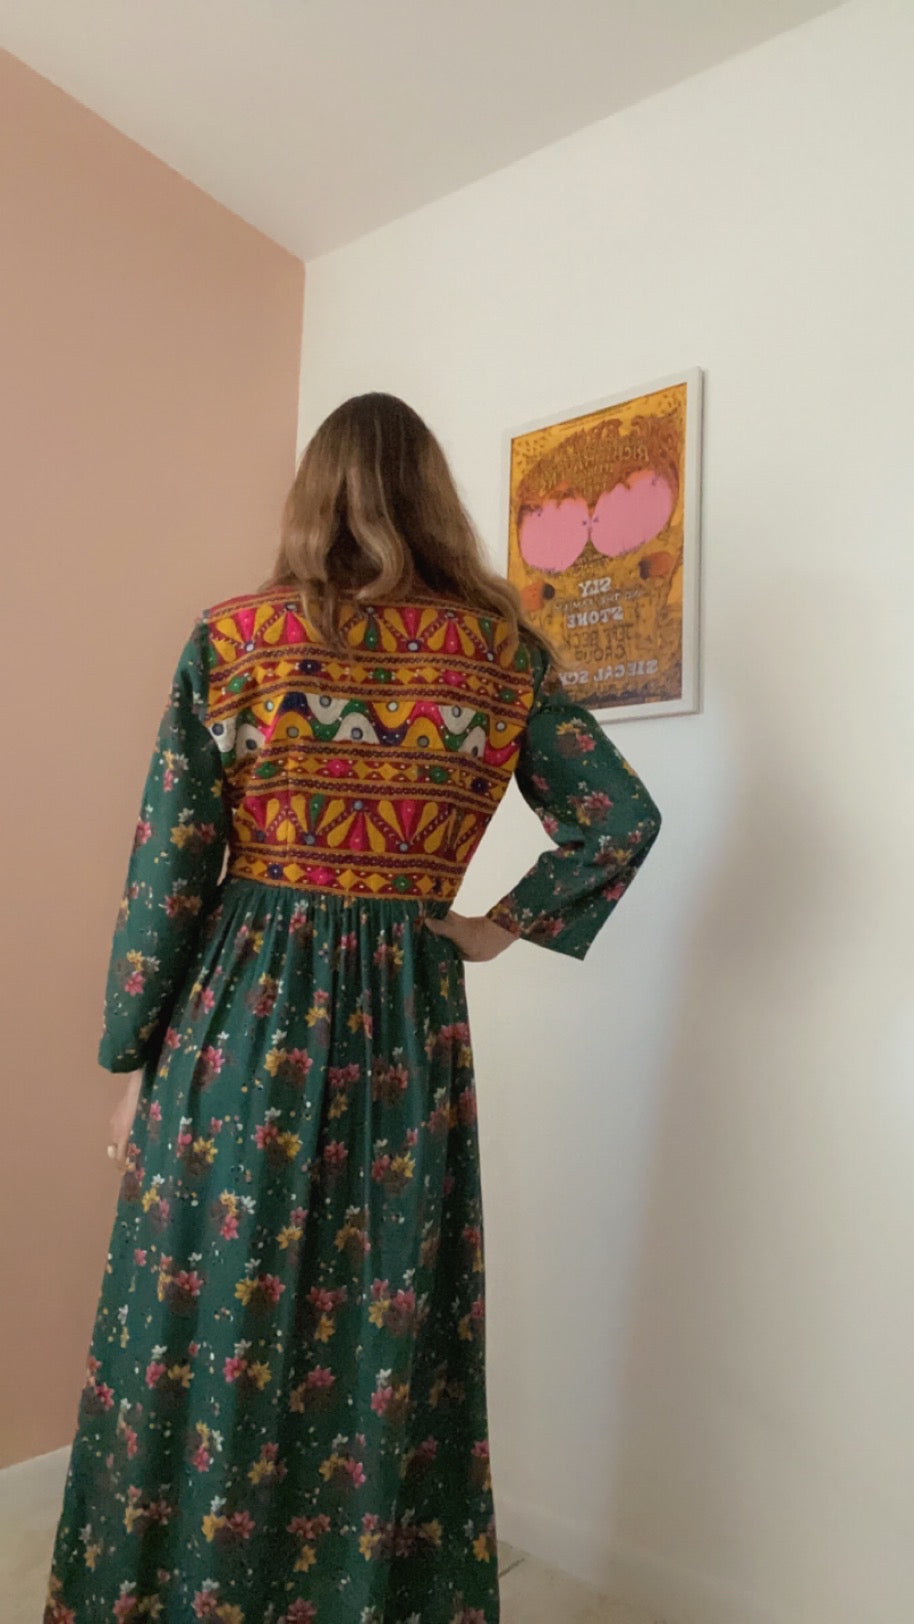 Load image into Gallery viewer, Hand Embroidered 70s Boho Dream Dress from India, size M
